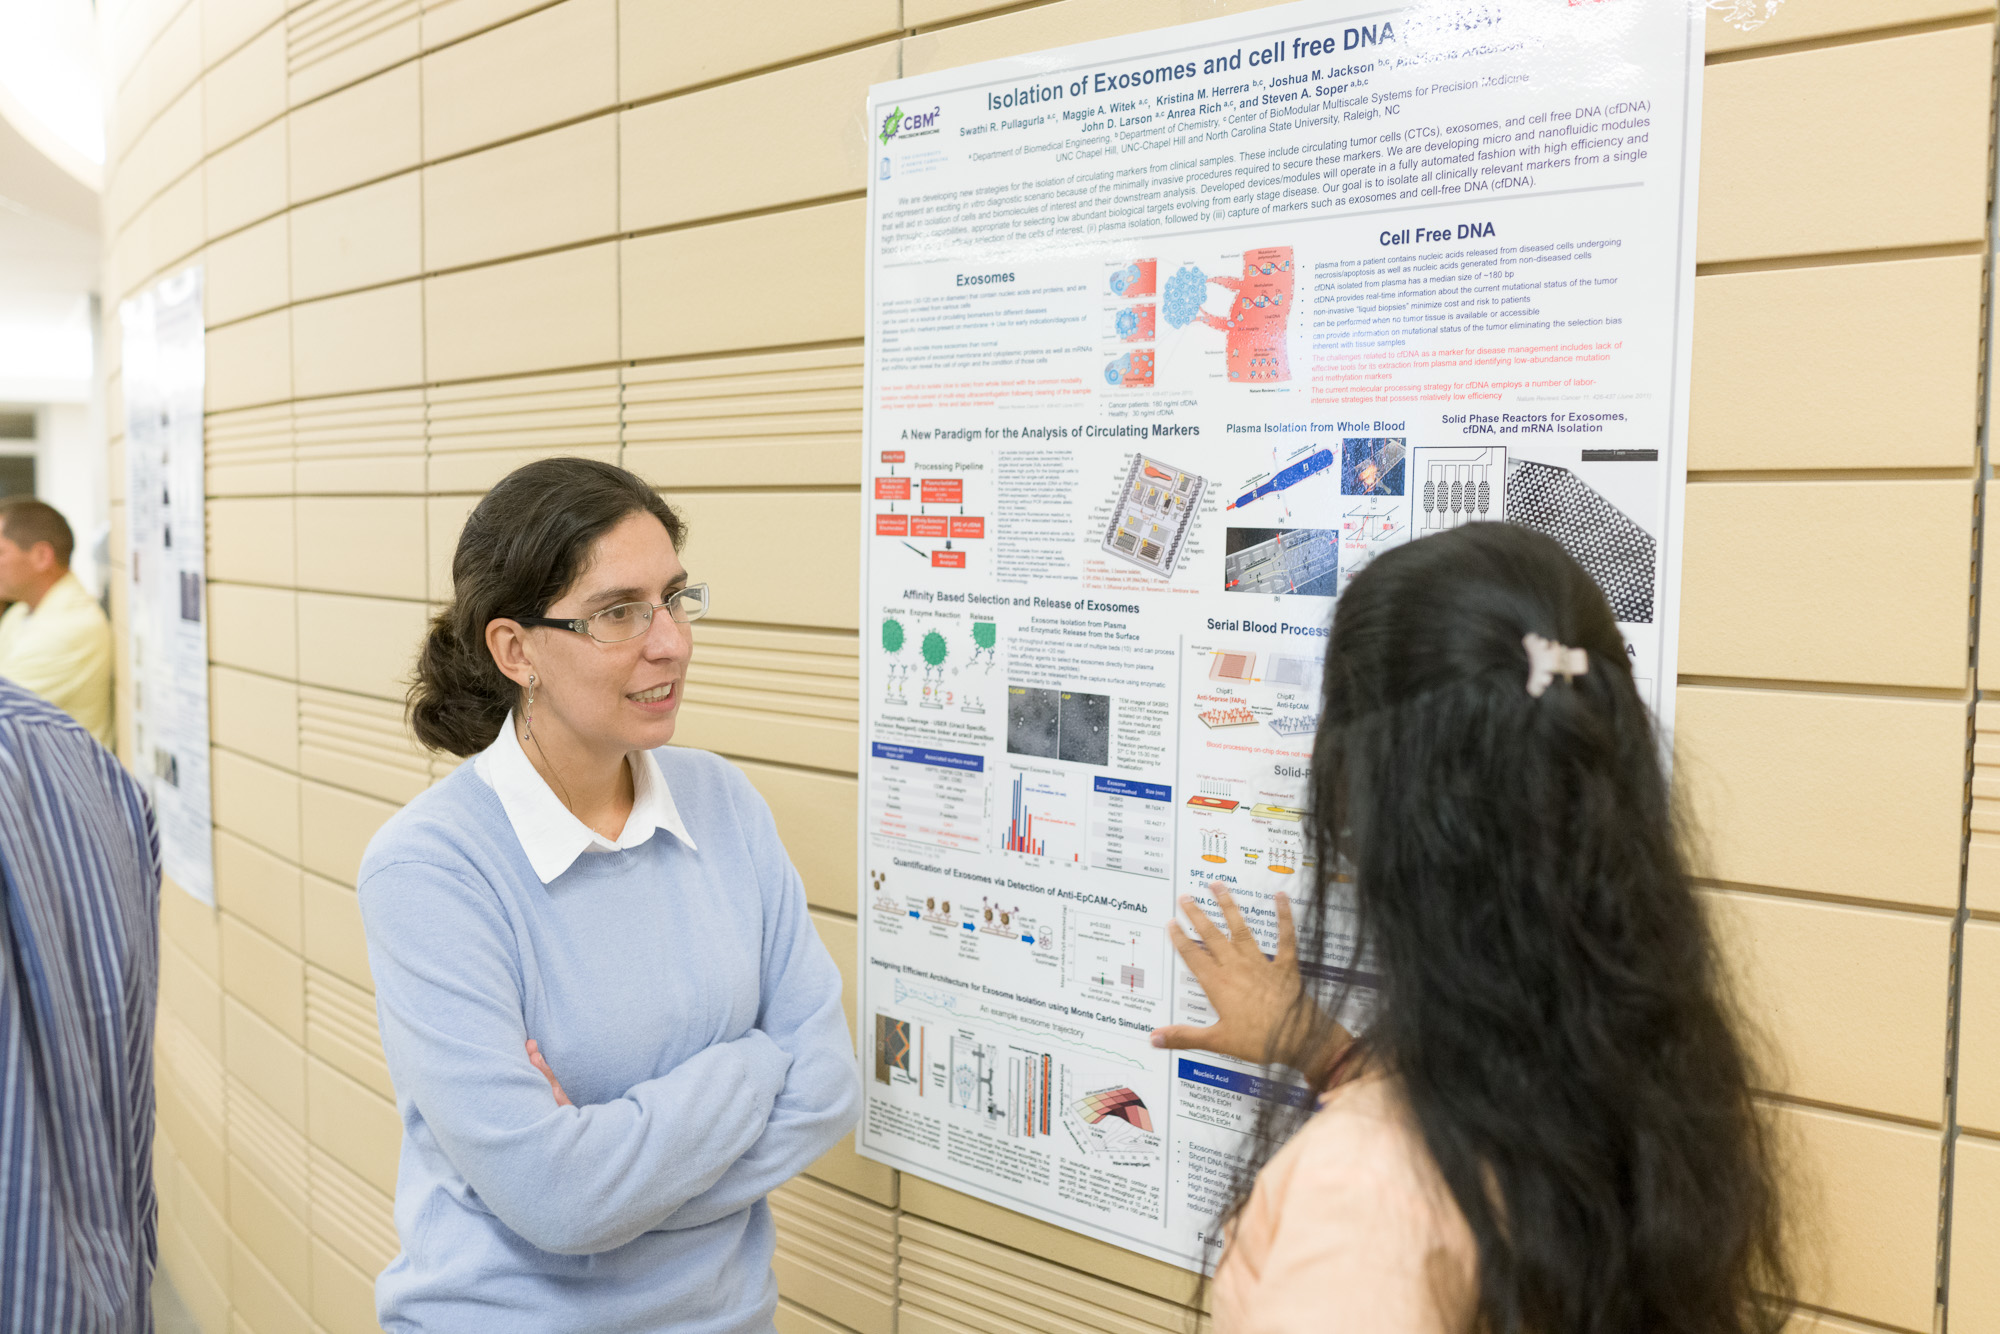 A researcher engages in a discussion about her scientific poster with another attendee at an event.